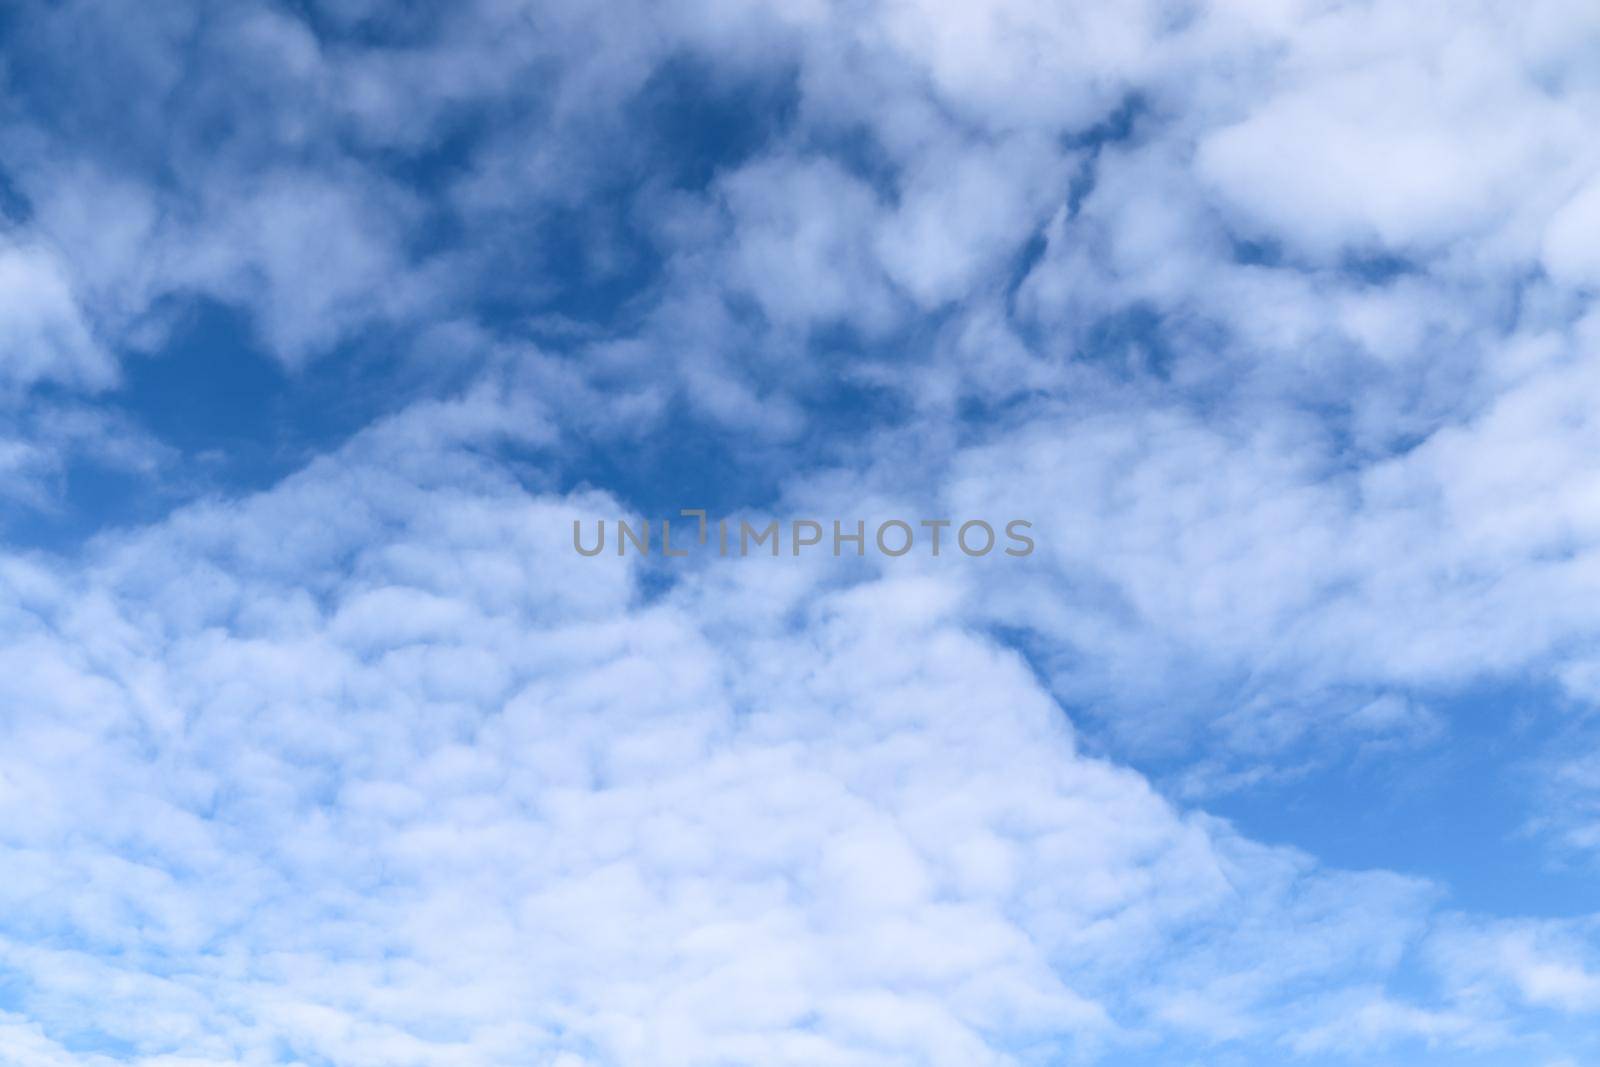 Beautiful fluffy white cloud formations in a deep blue summer sky by MP_foto71